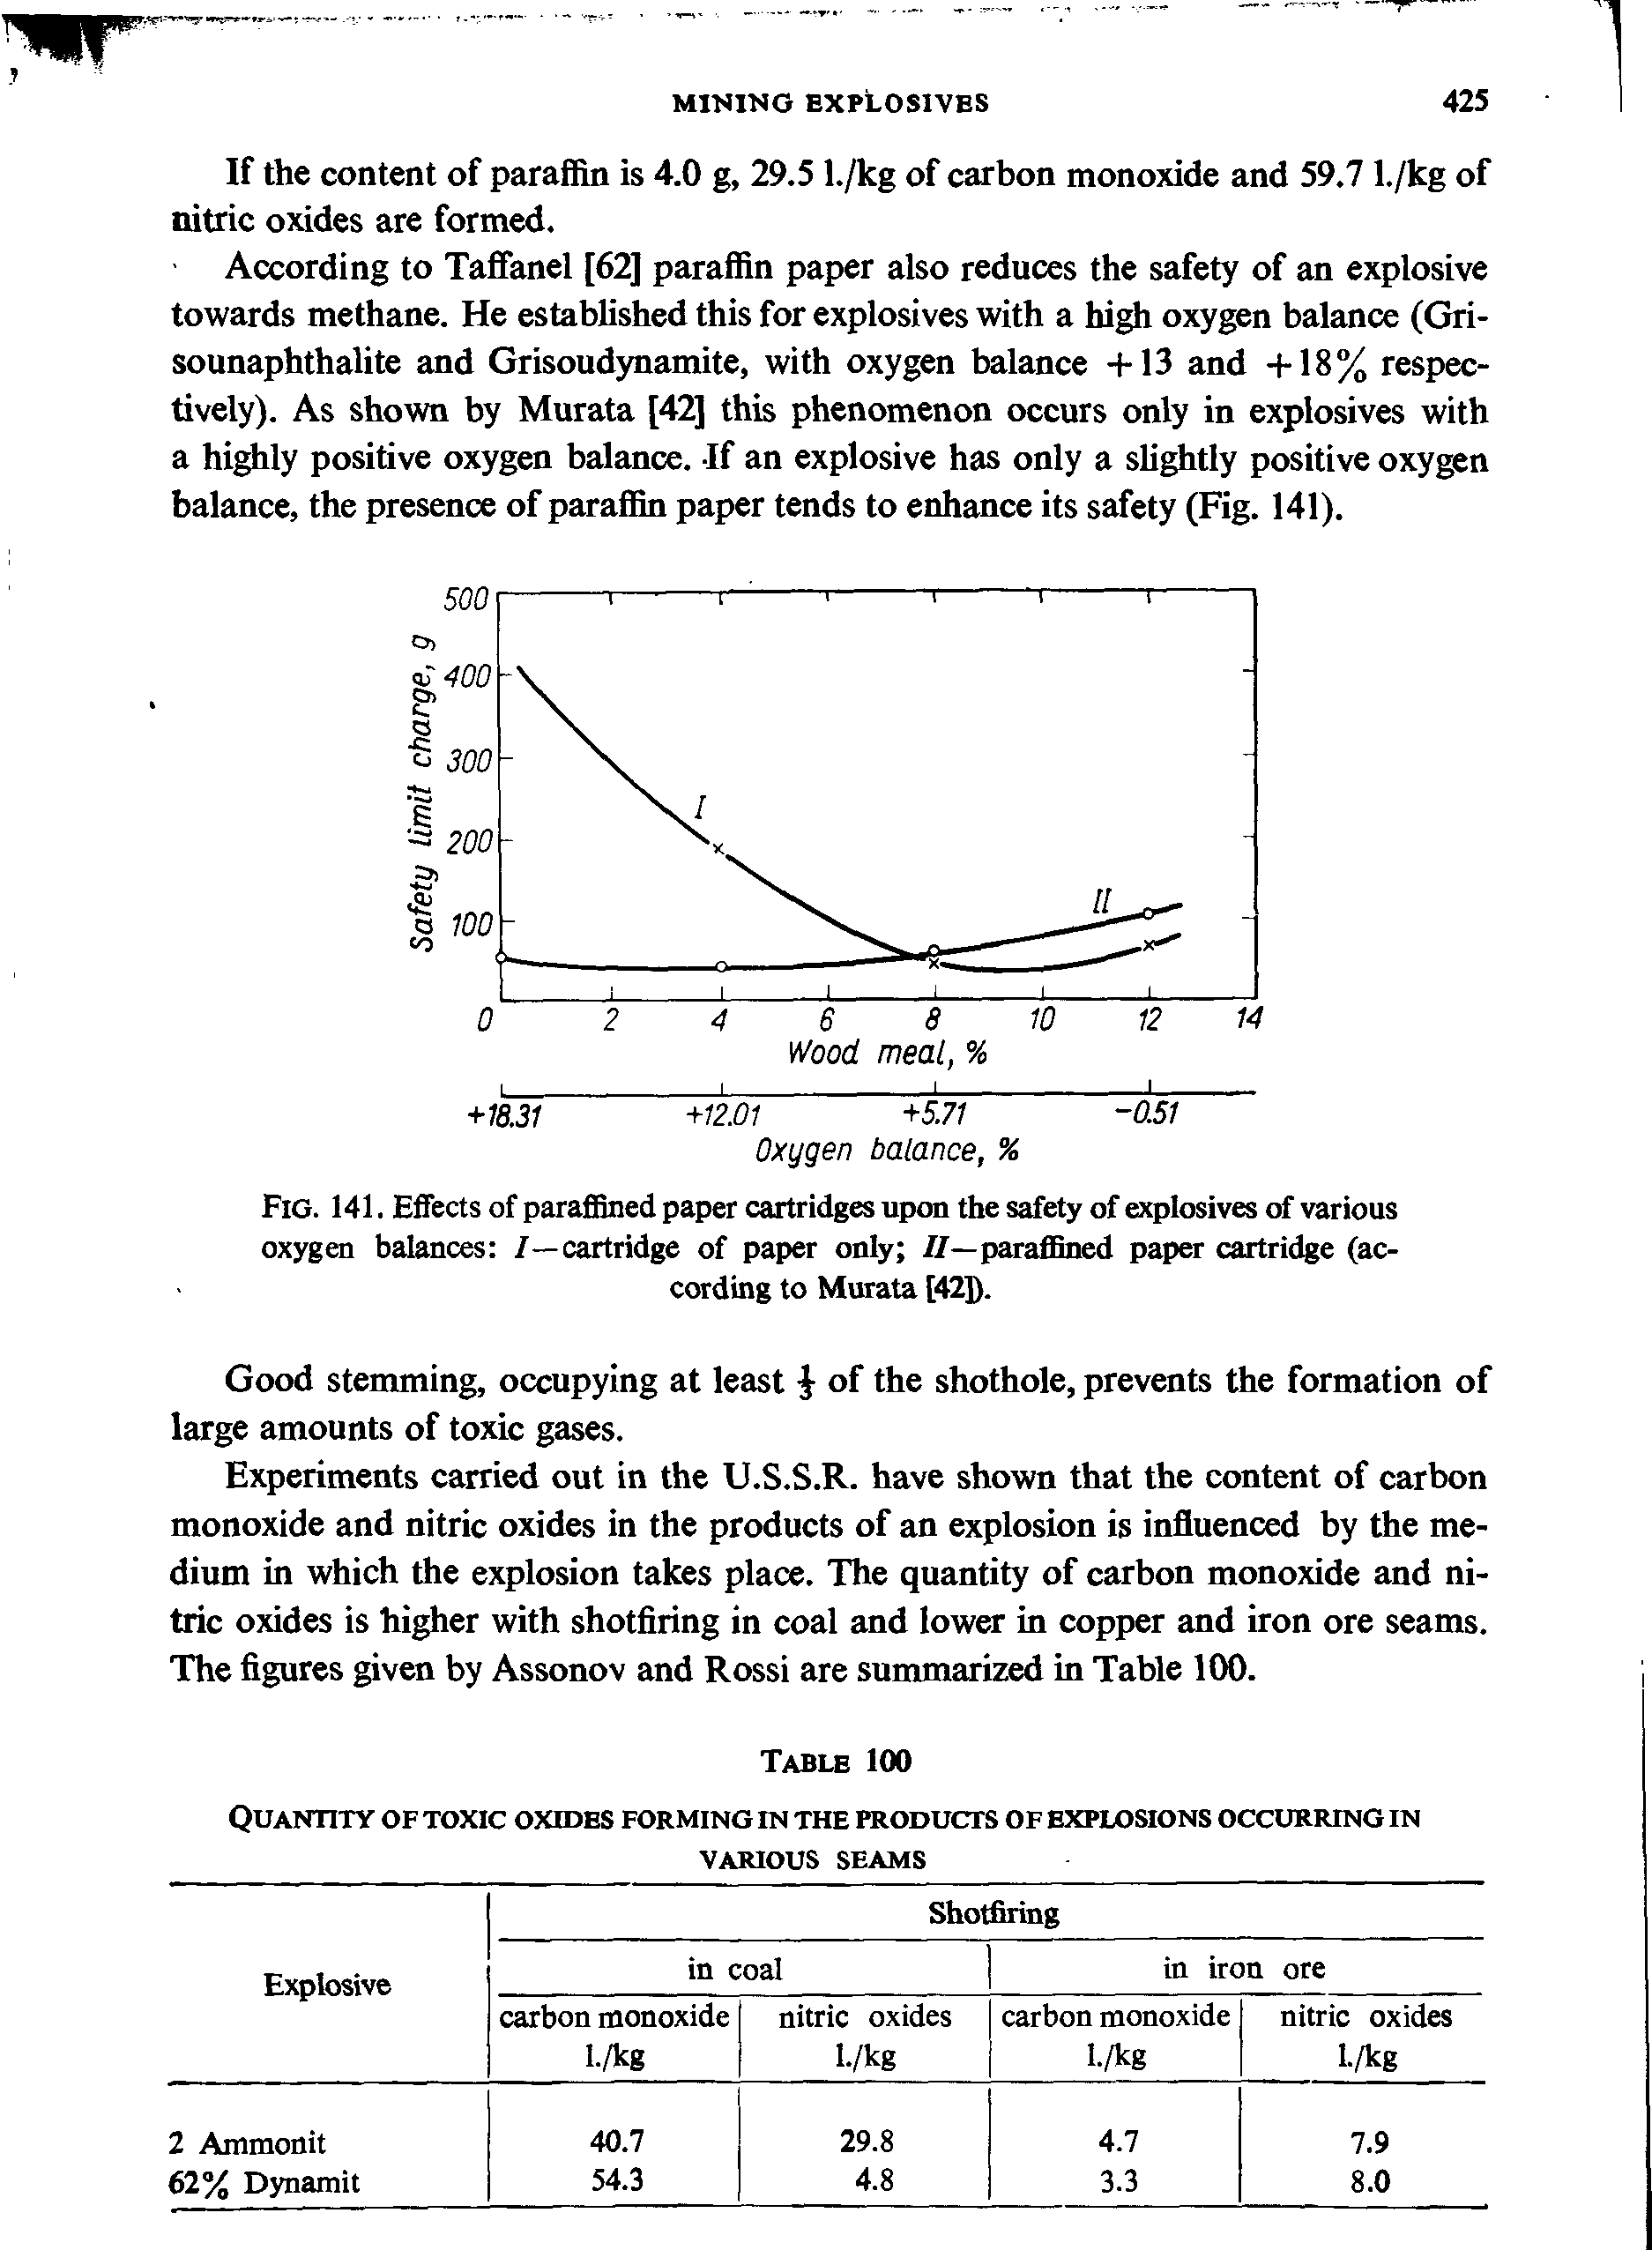 Fig. 141. Effects of paraffined paper cartridges upon the safety of explosives of various oxygen balances /—cartridge of paper only //— paraffined paper cartridge (according to Murata [42]).